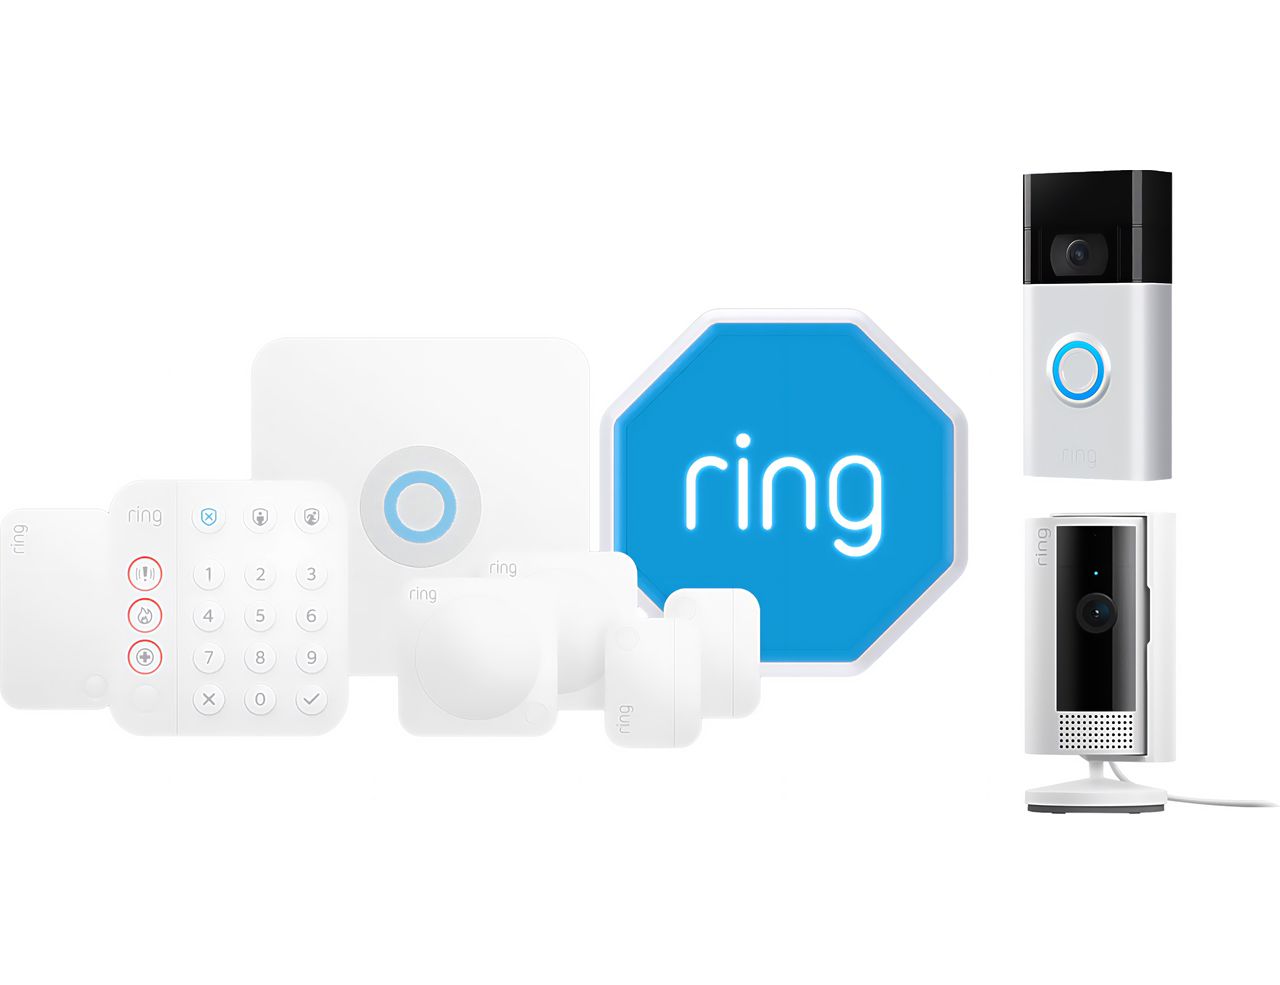 8-Piece Ring Alarm Home Security Kit + Video Doorbell (2nd